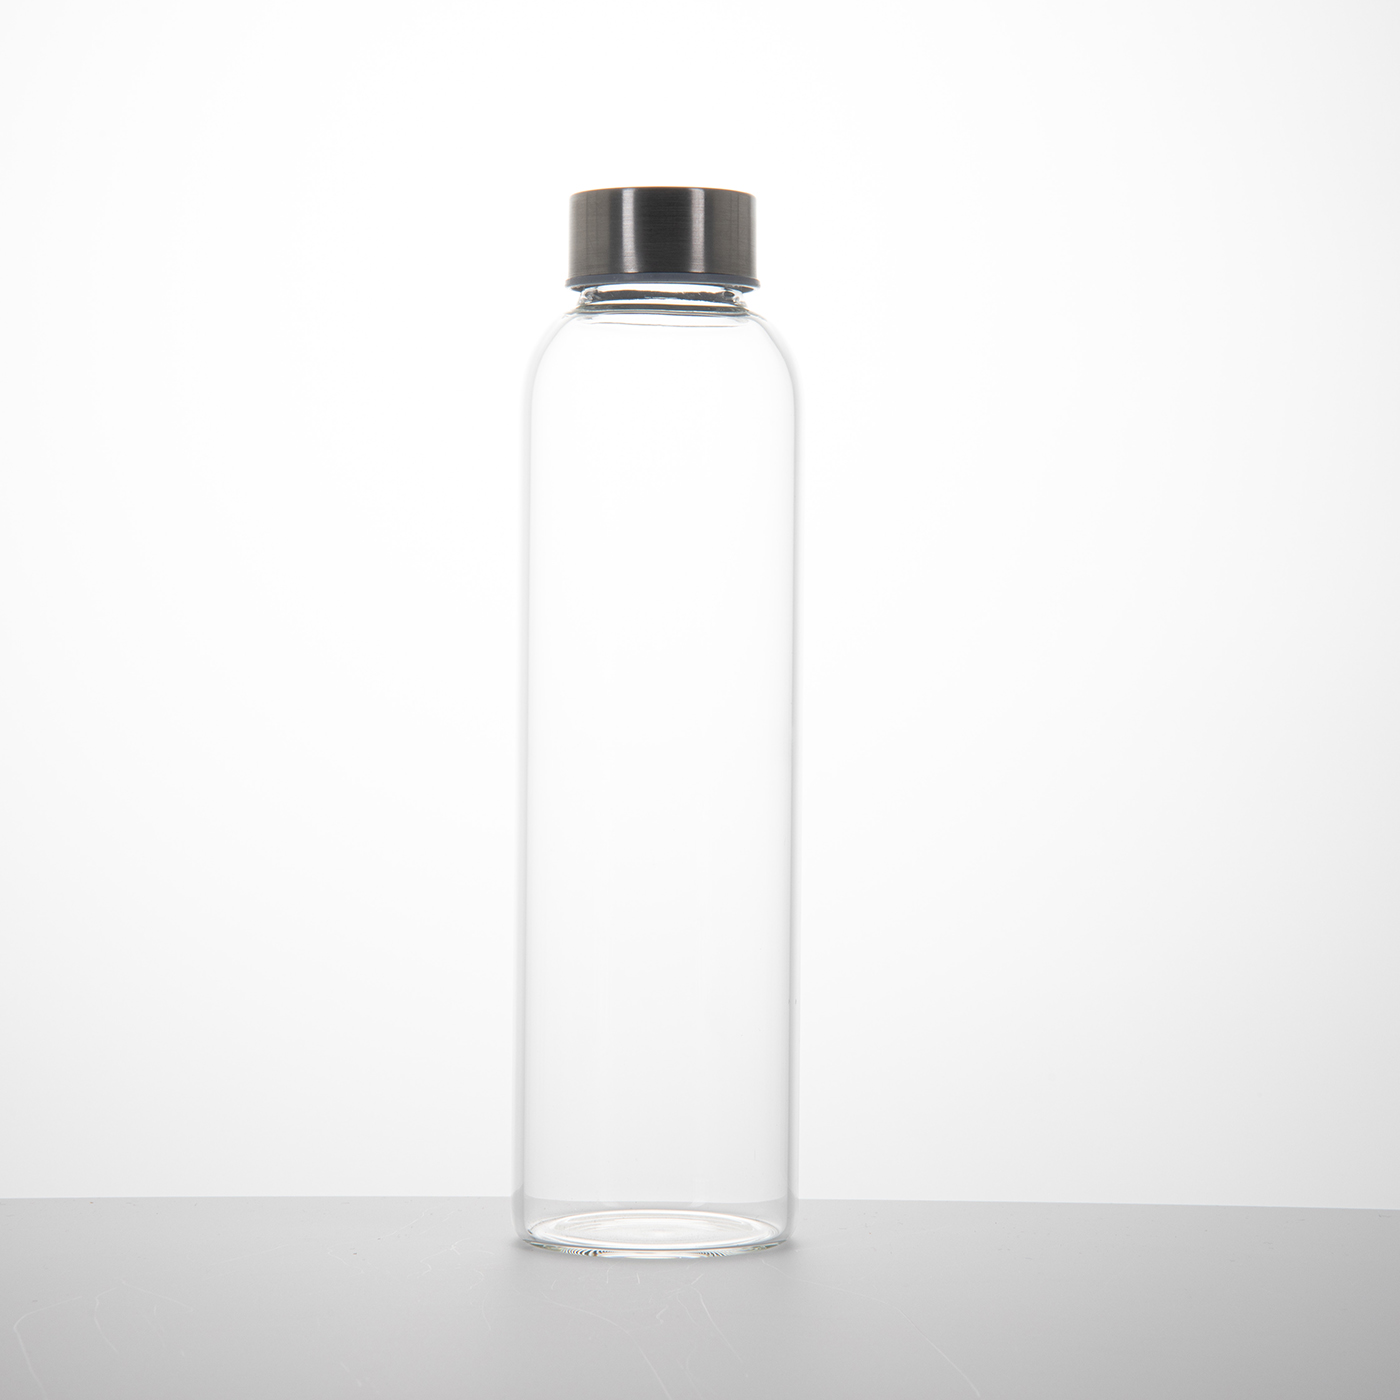 19 oz. Glass Water Bottle With Nylon Sleeve3